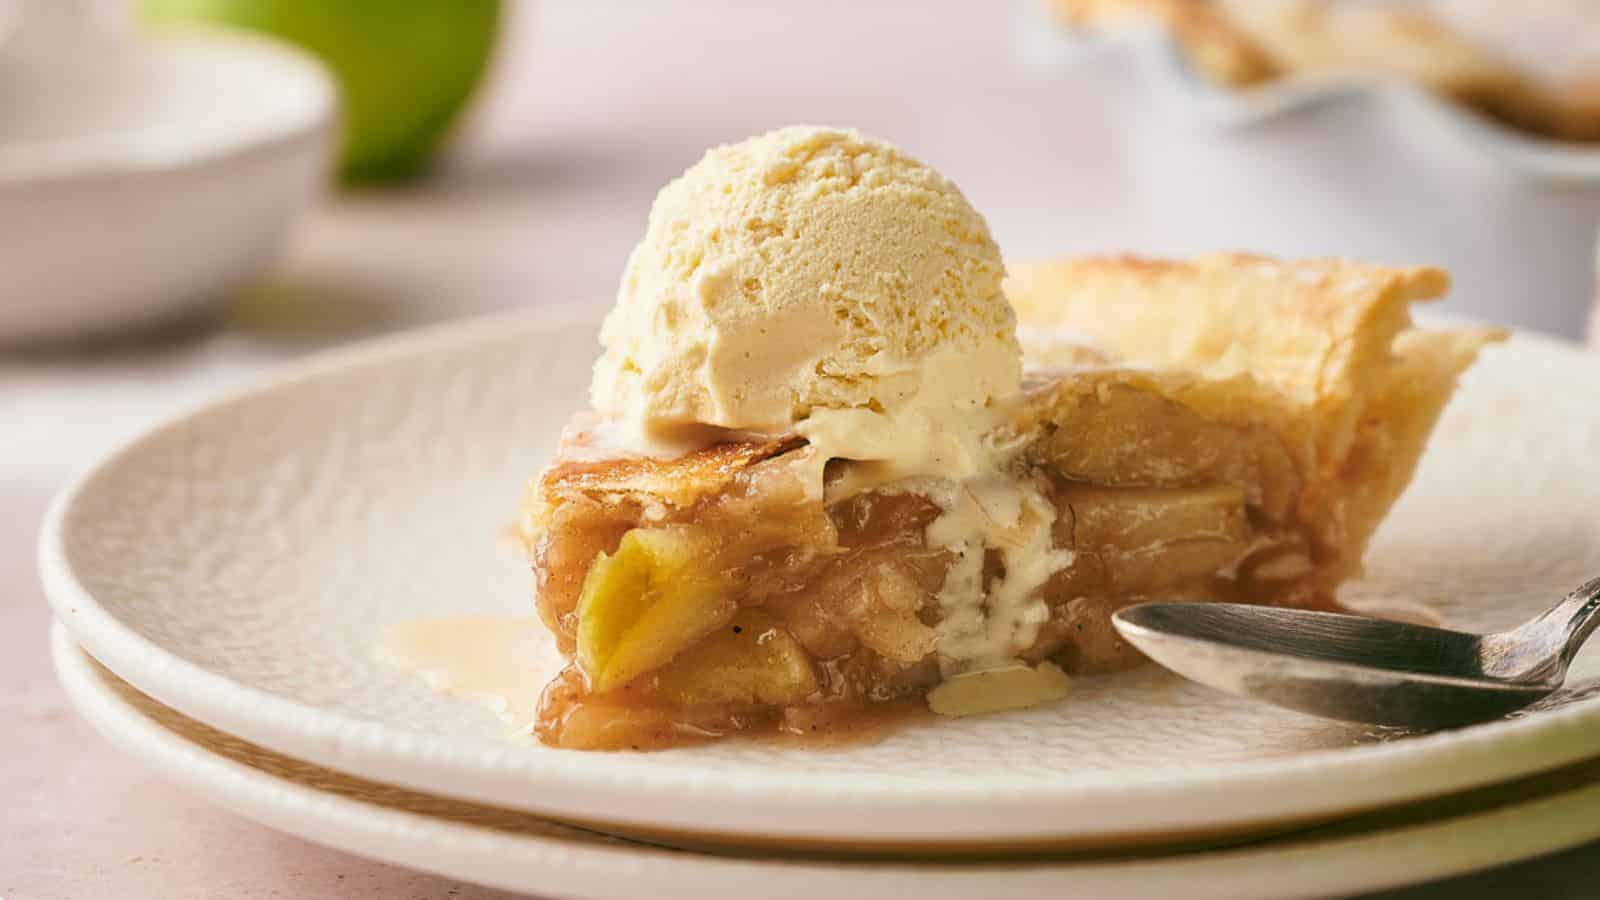 A slice of apple pie on a plate with a scoop of ice cream.